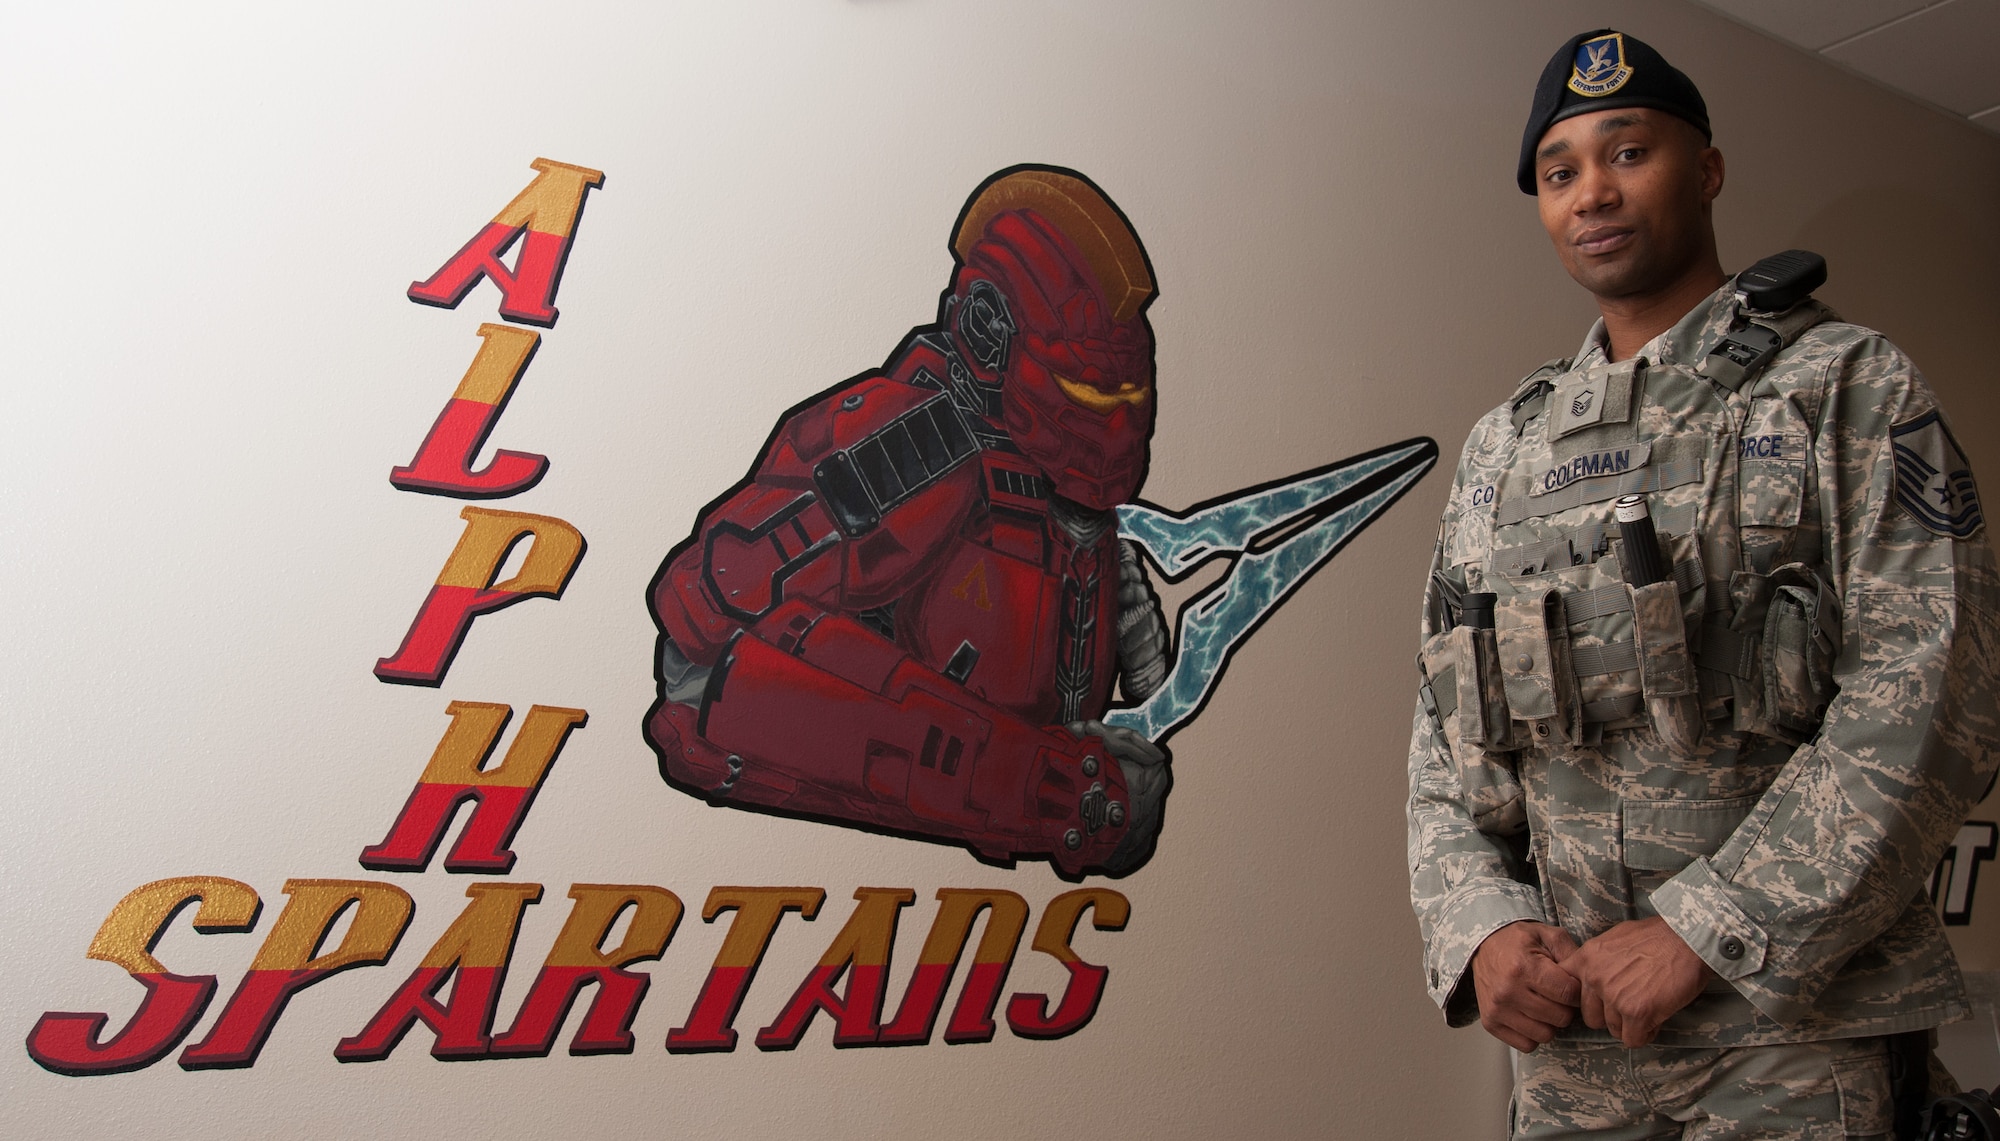 Master Sgt. Horace Coleman IV, 30th Security Forces Squadron flight chief, stands next to a mural depicting his Alpha Flight mascot, Sept. 14, 2015, Vandenberg Air Force Base, Calif. Coleman was announced as the 2015 Lance P. Sijan award winner for Air Force Space Command on Sept. 2, 2015. (U.S. Air Force photo by Michael Peterson)